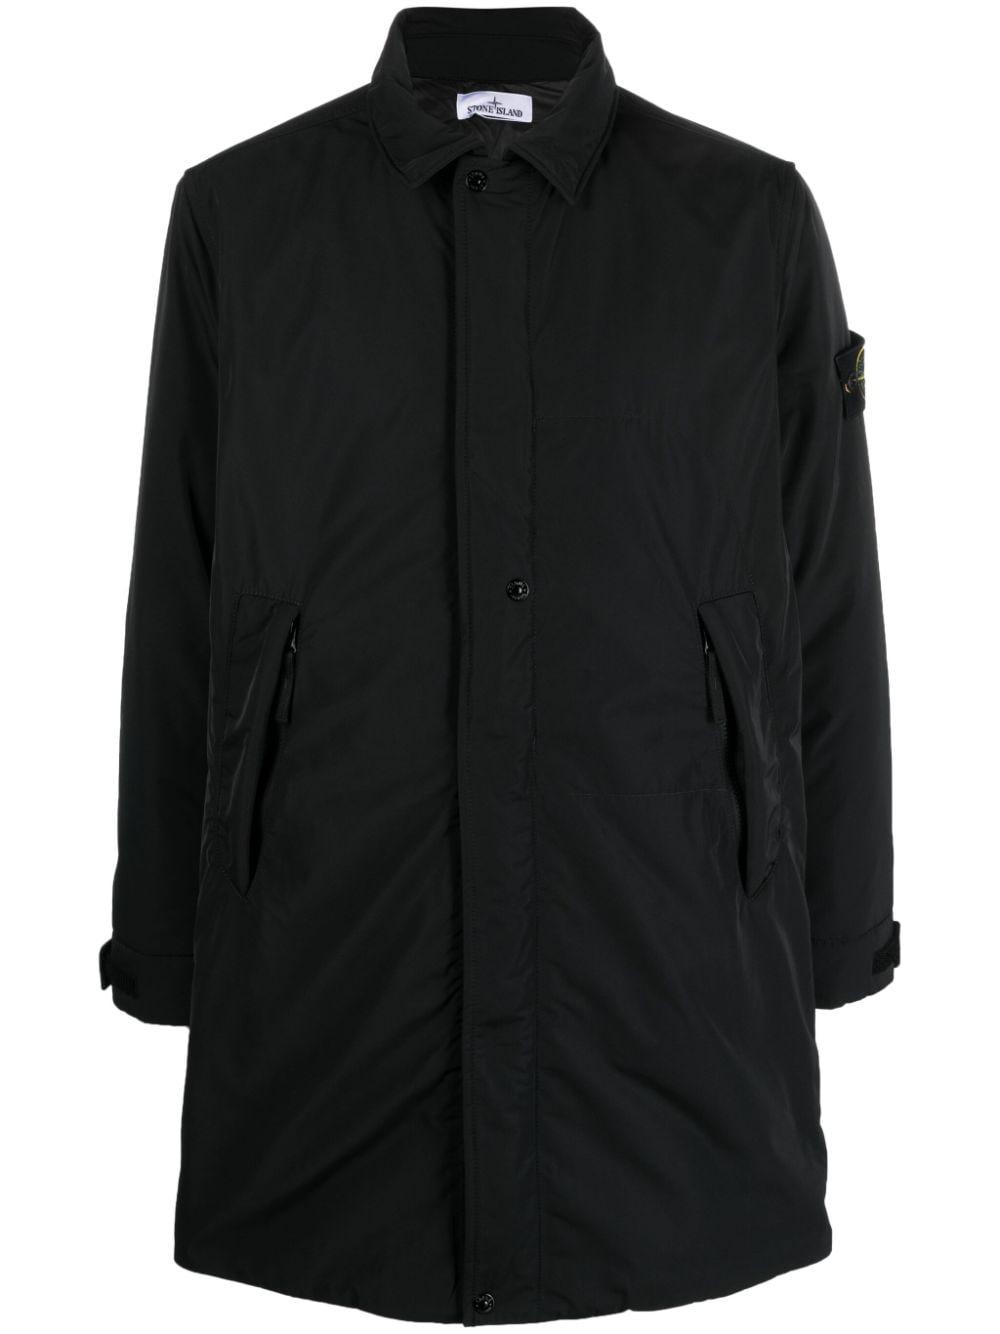 Stone Island Compass Logo Trench Coat in Black for Men | Lyst